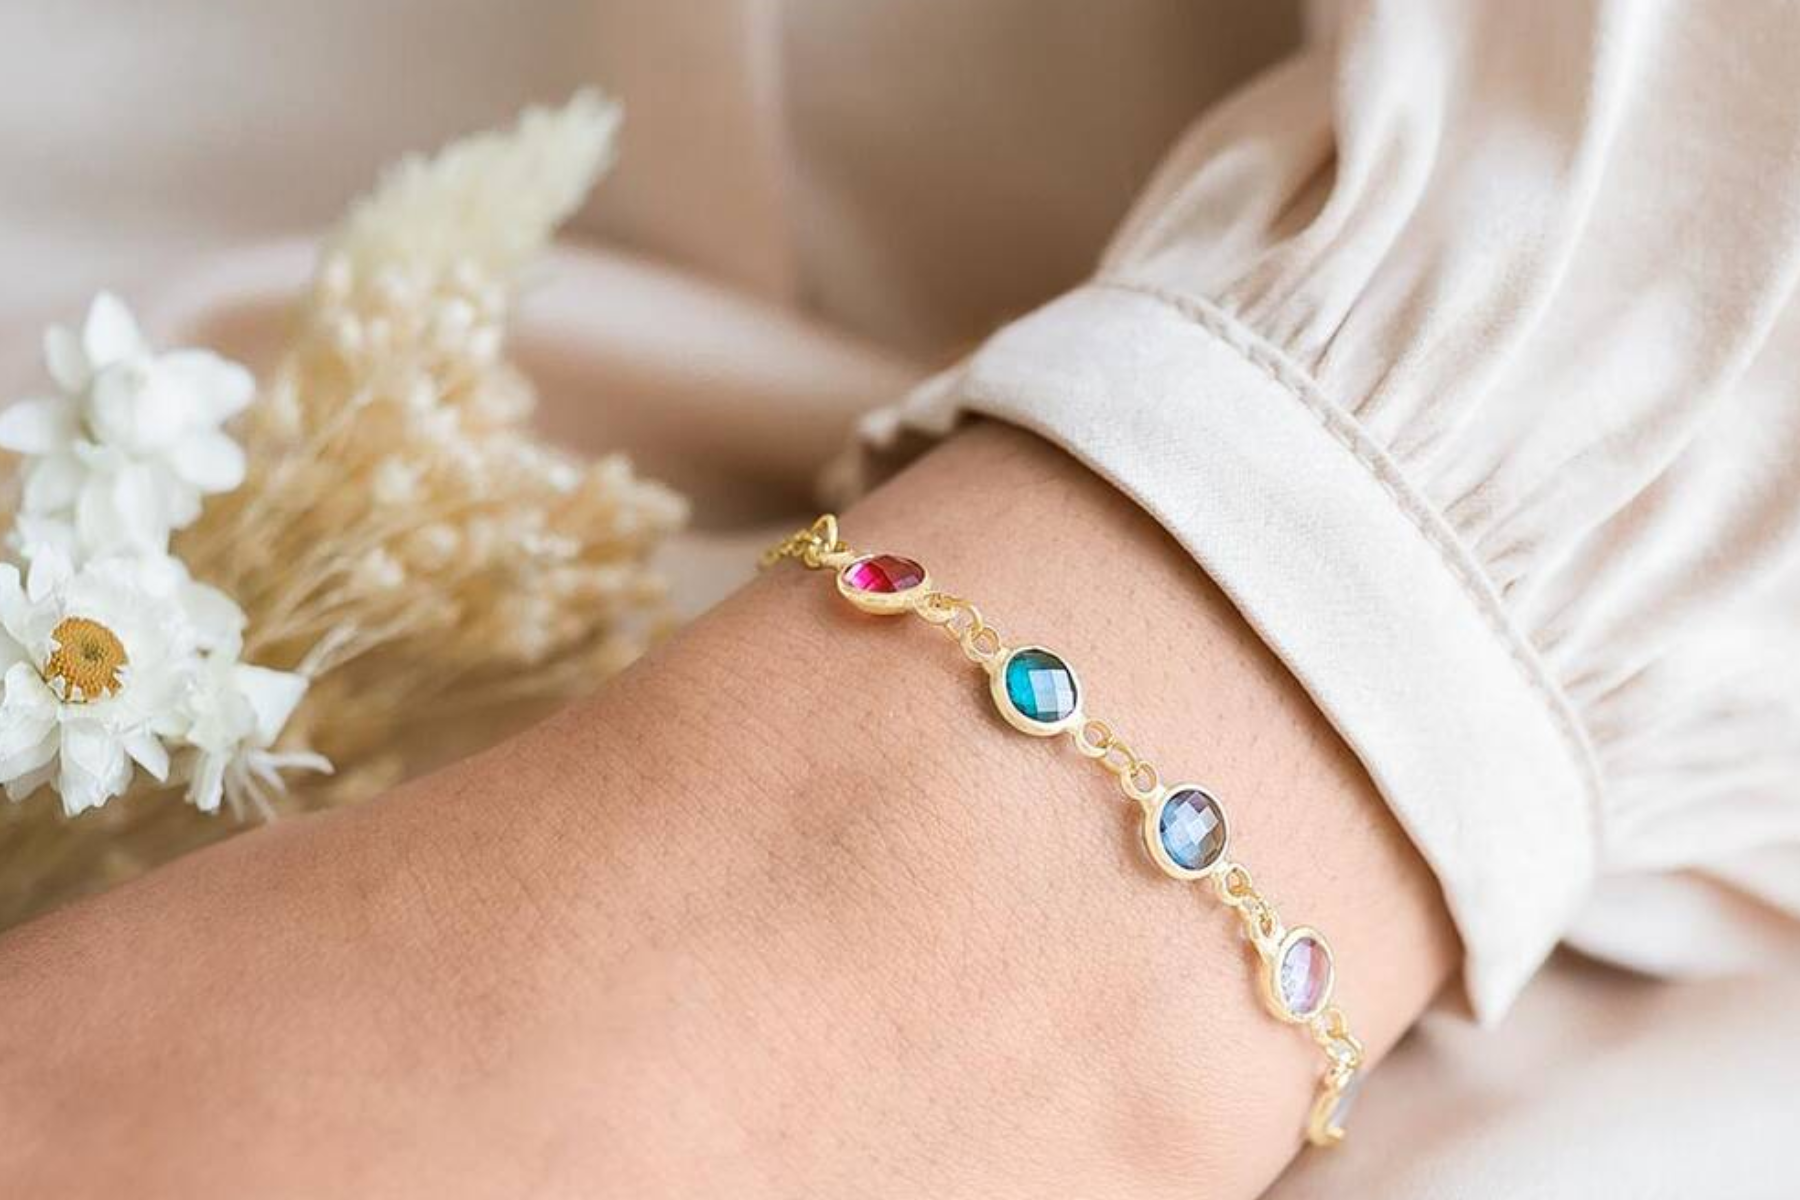 A woman's forearm is adorned with bracelets containing various birthstones